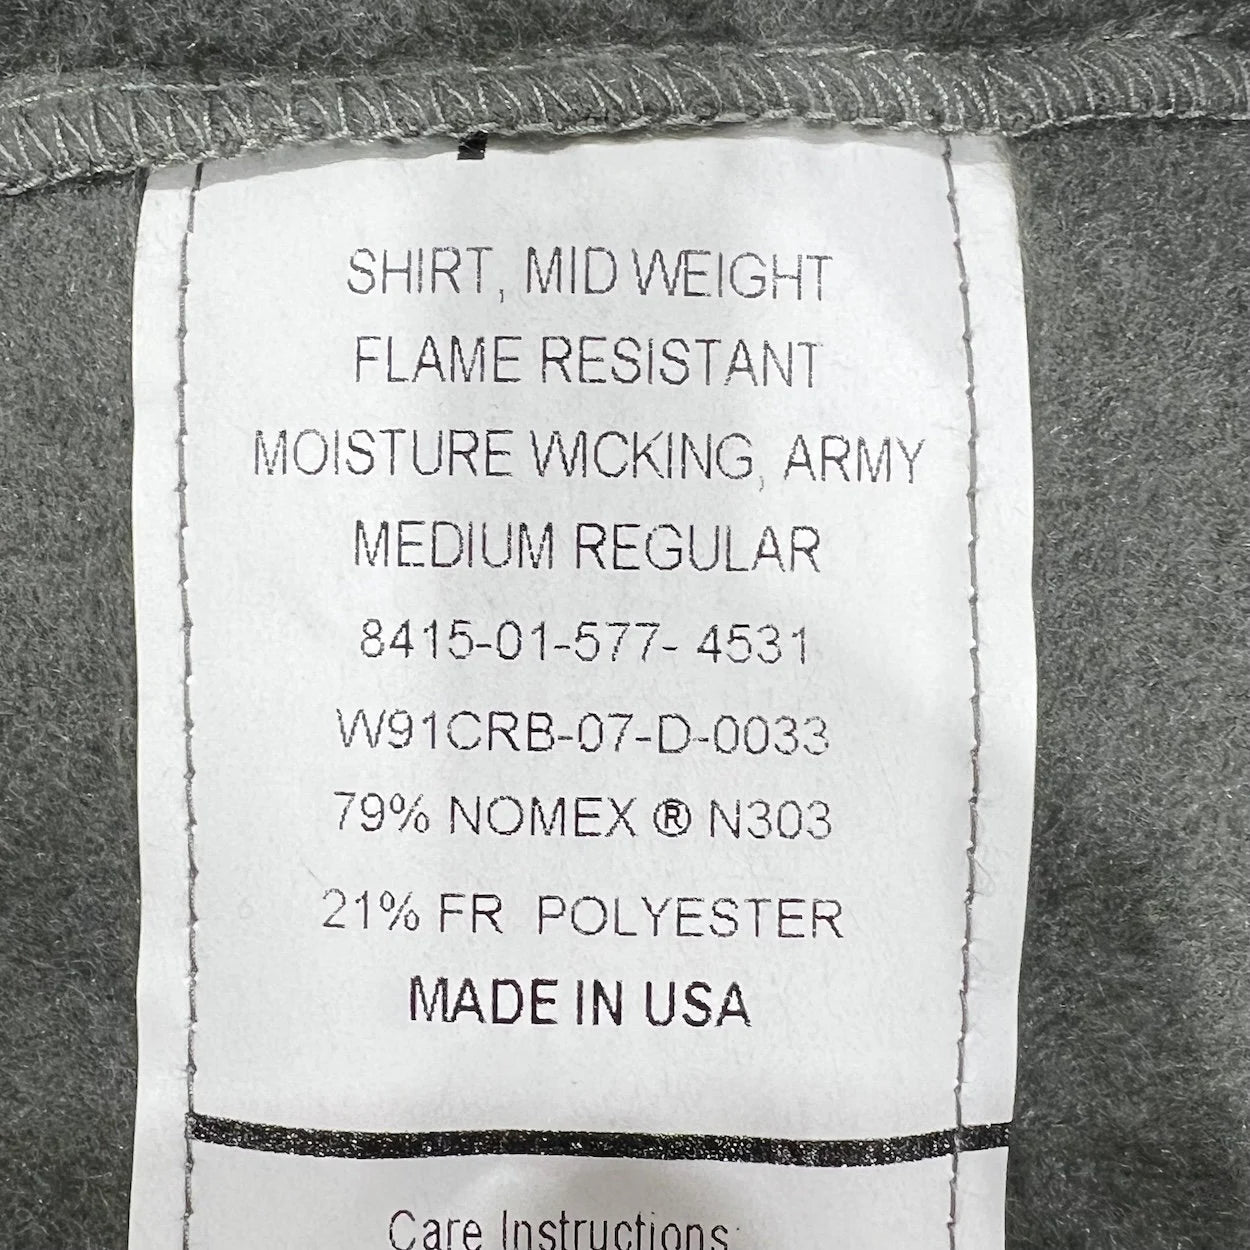 US Military Mid Weight Flame Resistant Cold Weather Fleece from Polartec.